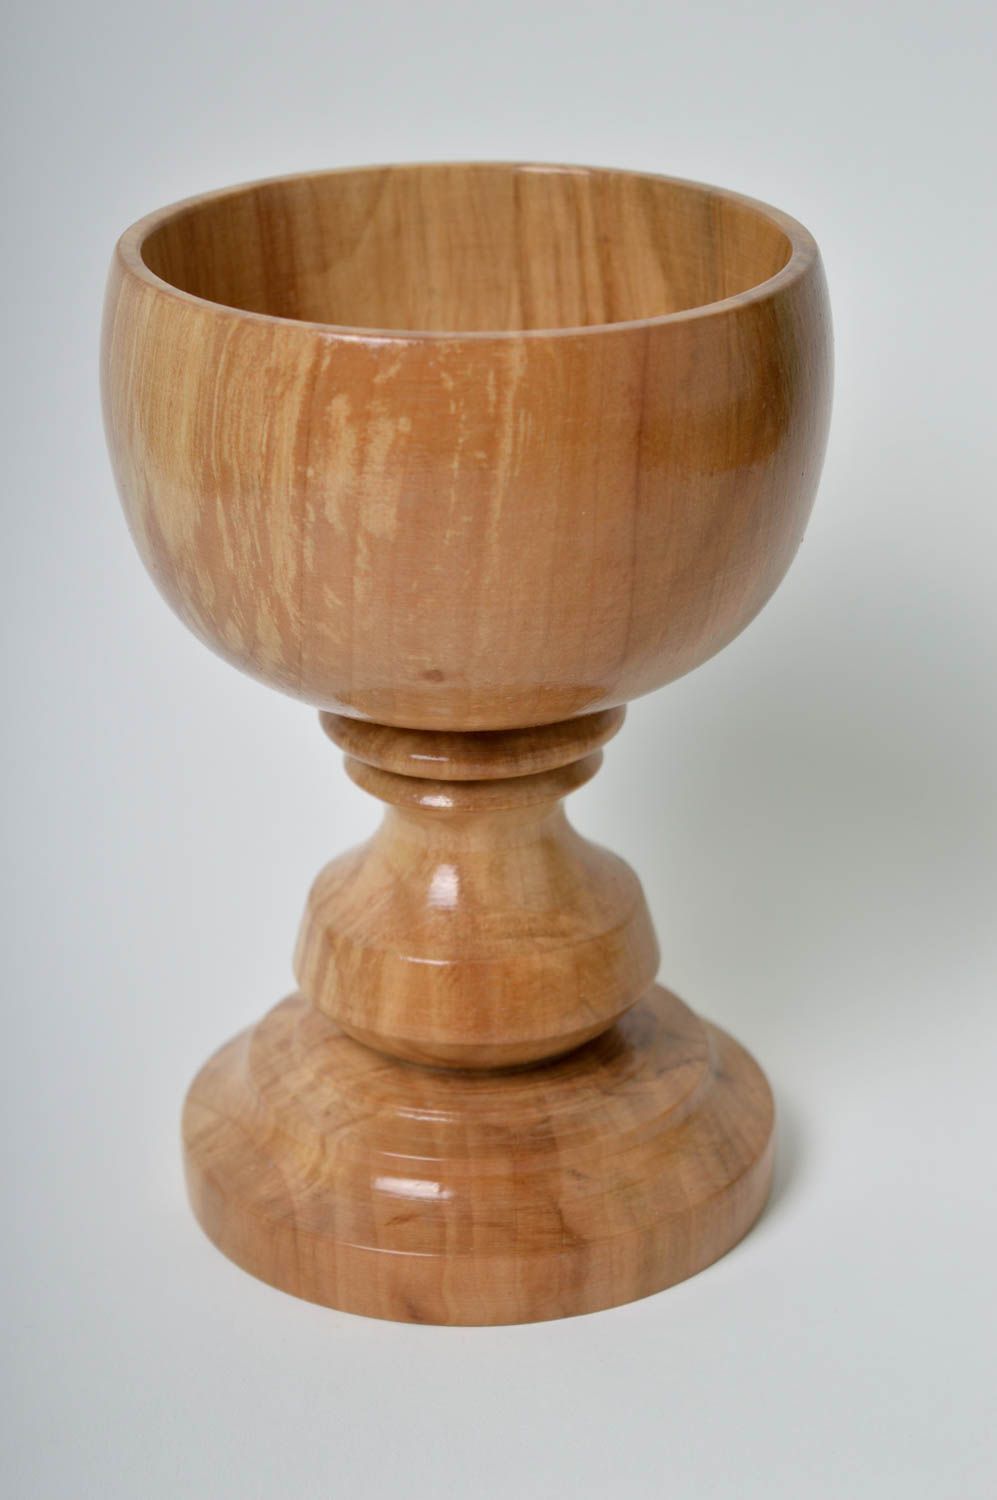 Homemade home decor wooden kitchenware decorative goblet for decorative use only photo 2